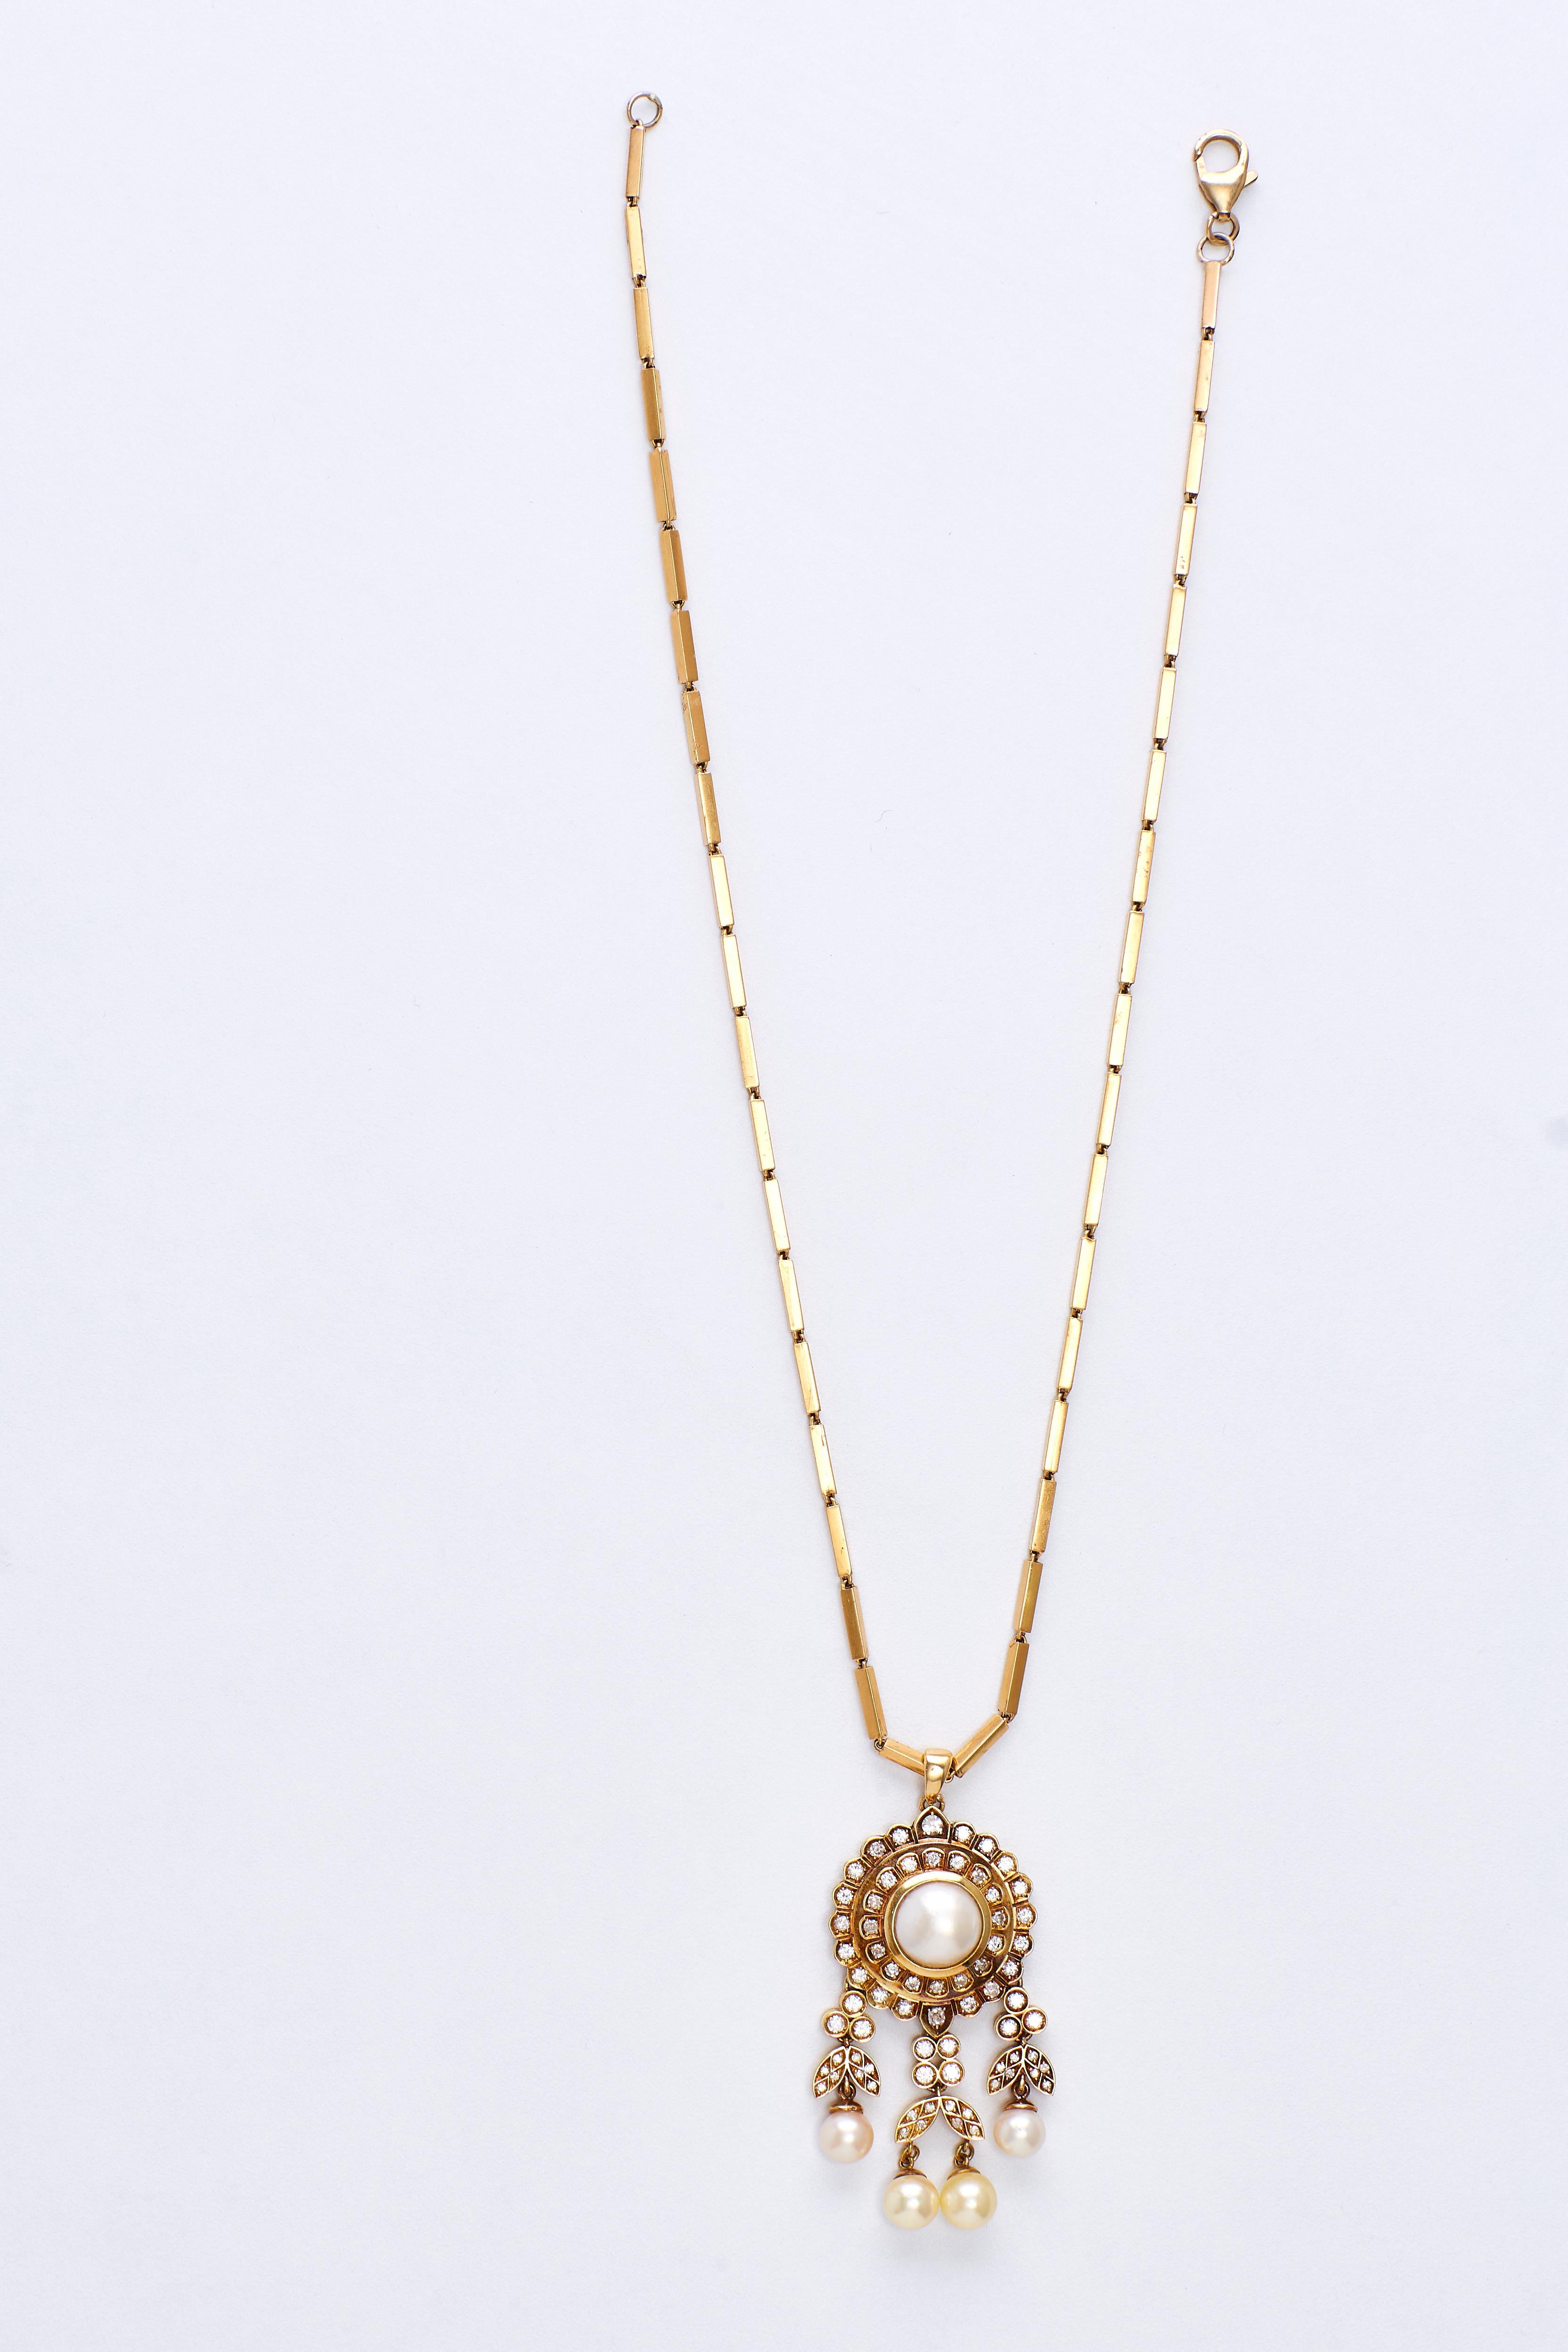 Women's Yellow Gold Diamonds and Pearls Necklace For Sale